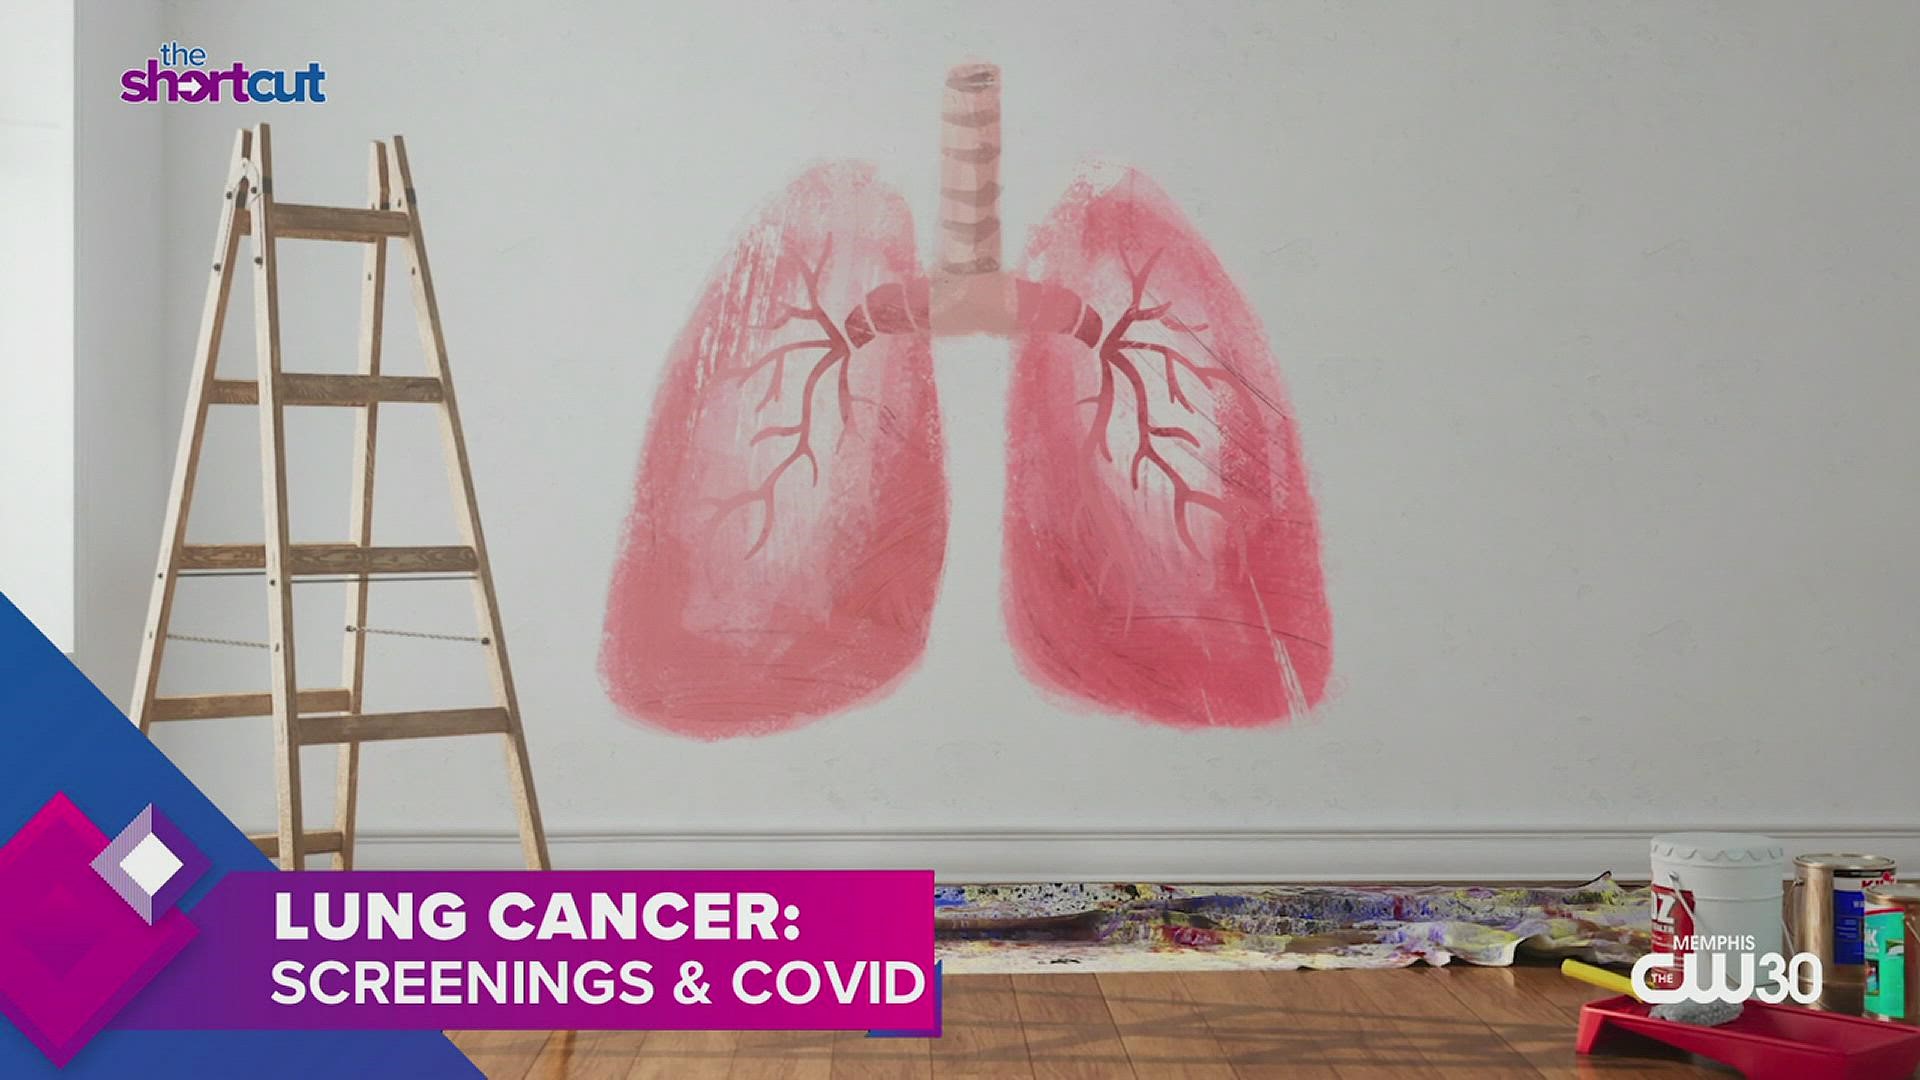 Did you know that getting screened for covid19 can also save you from dying of lung cancer? Find out how with Sydney Neely, Annabelle Gurwitch and Kim Norris!